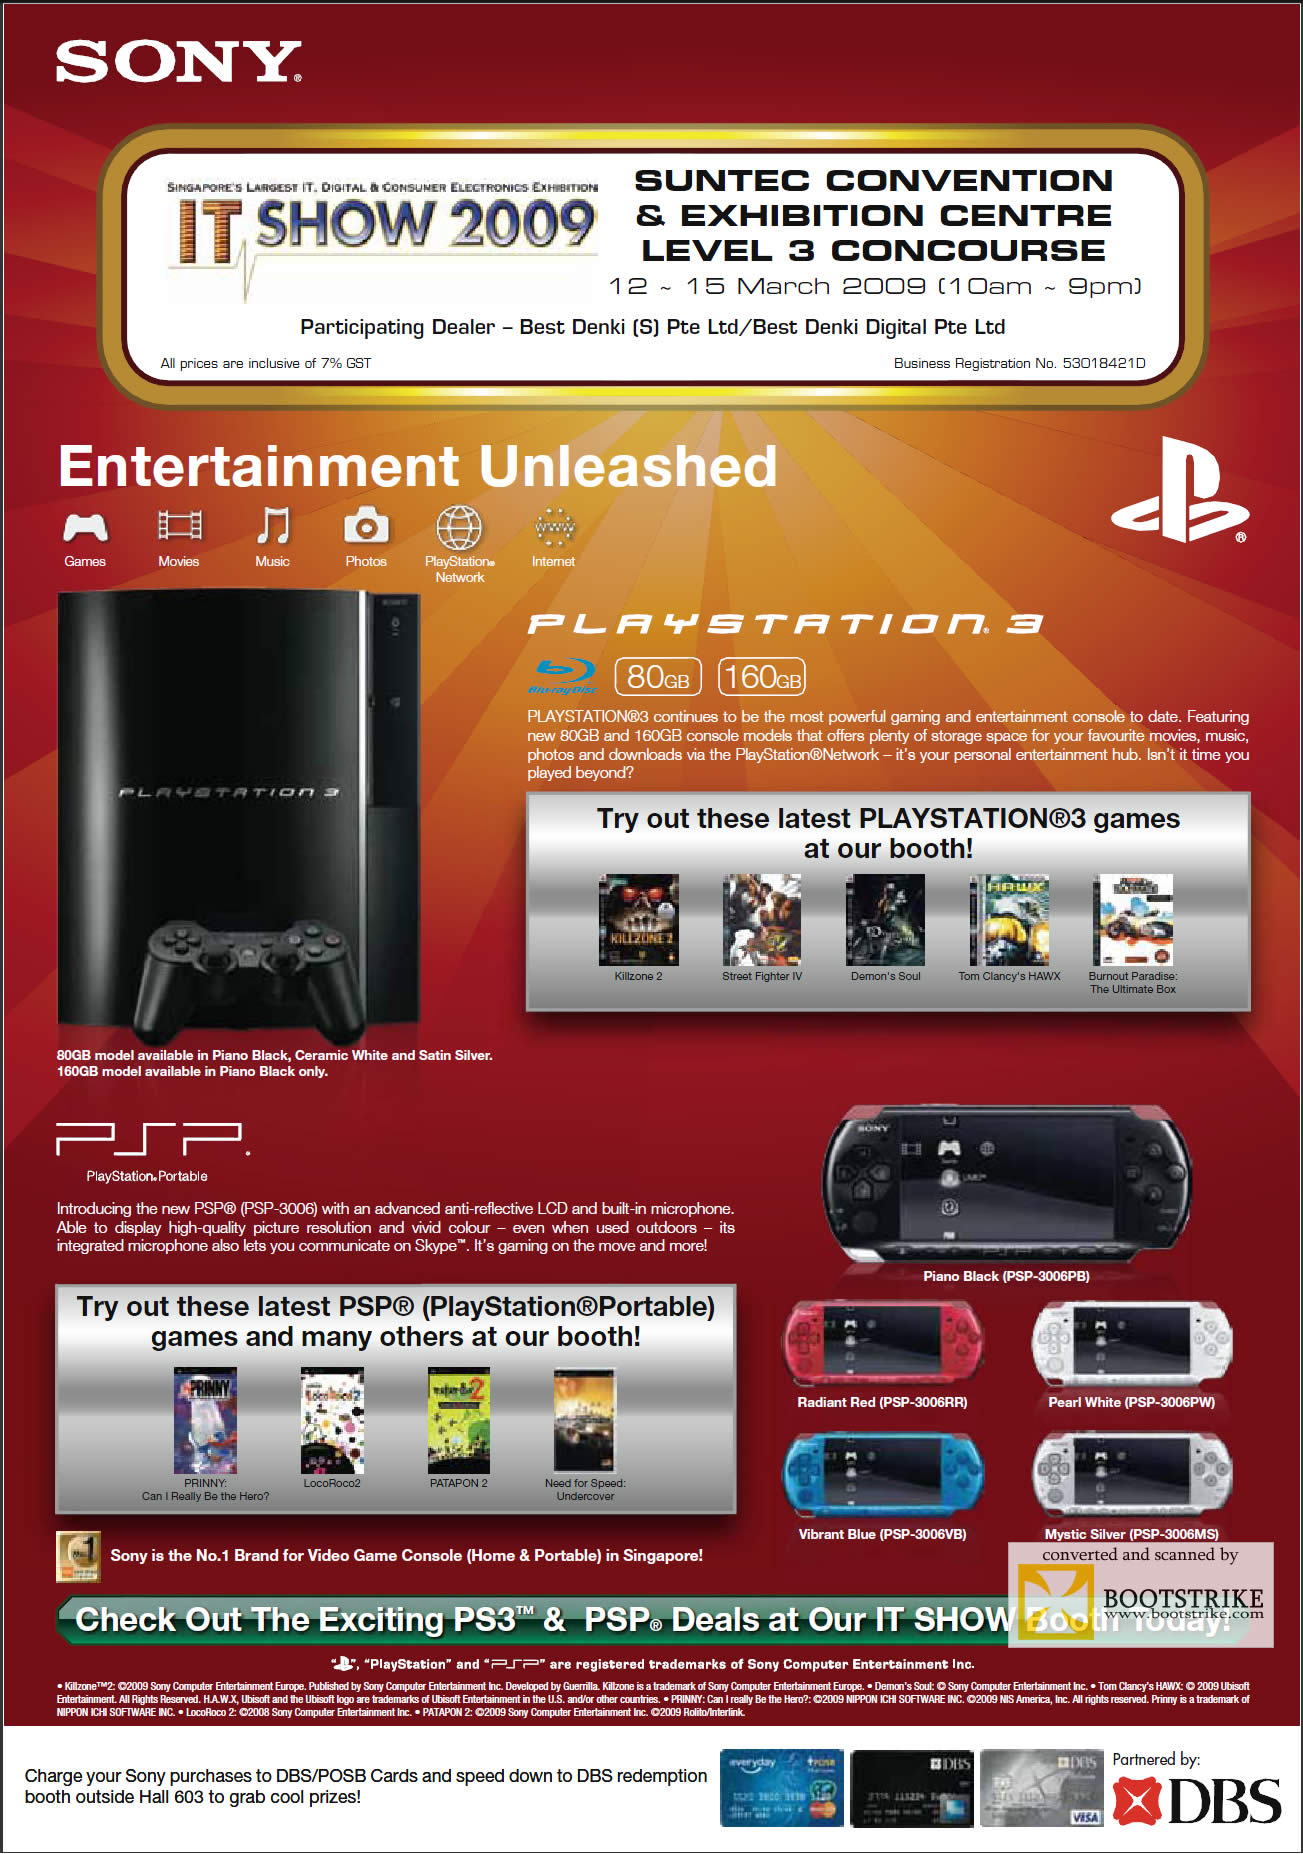 IT Show 2009 price list image brochure of Sony PlayStation 3 PSP